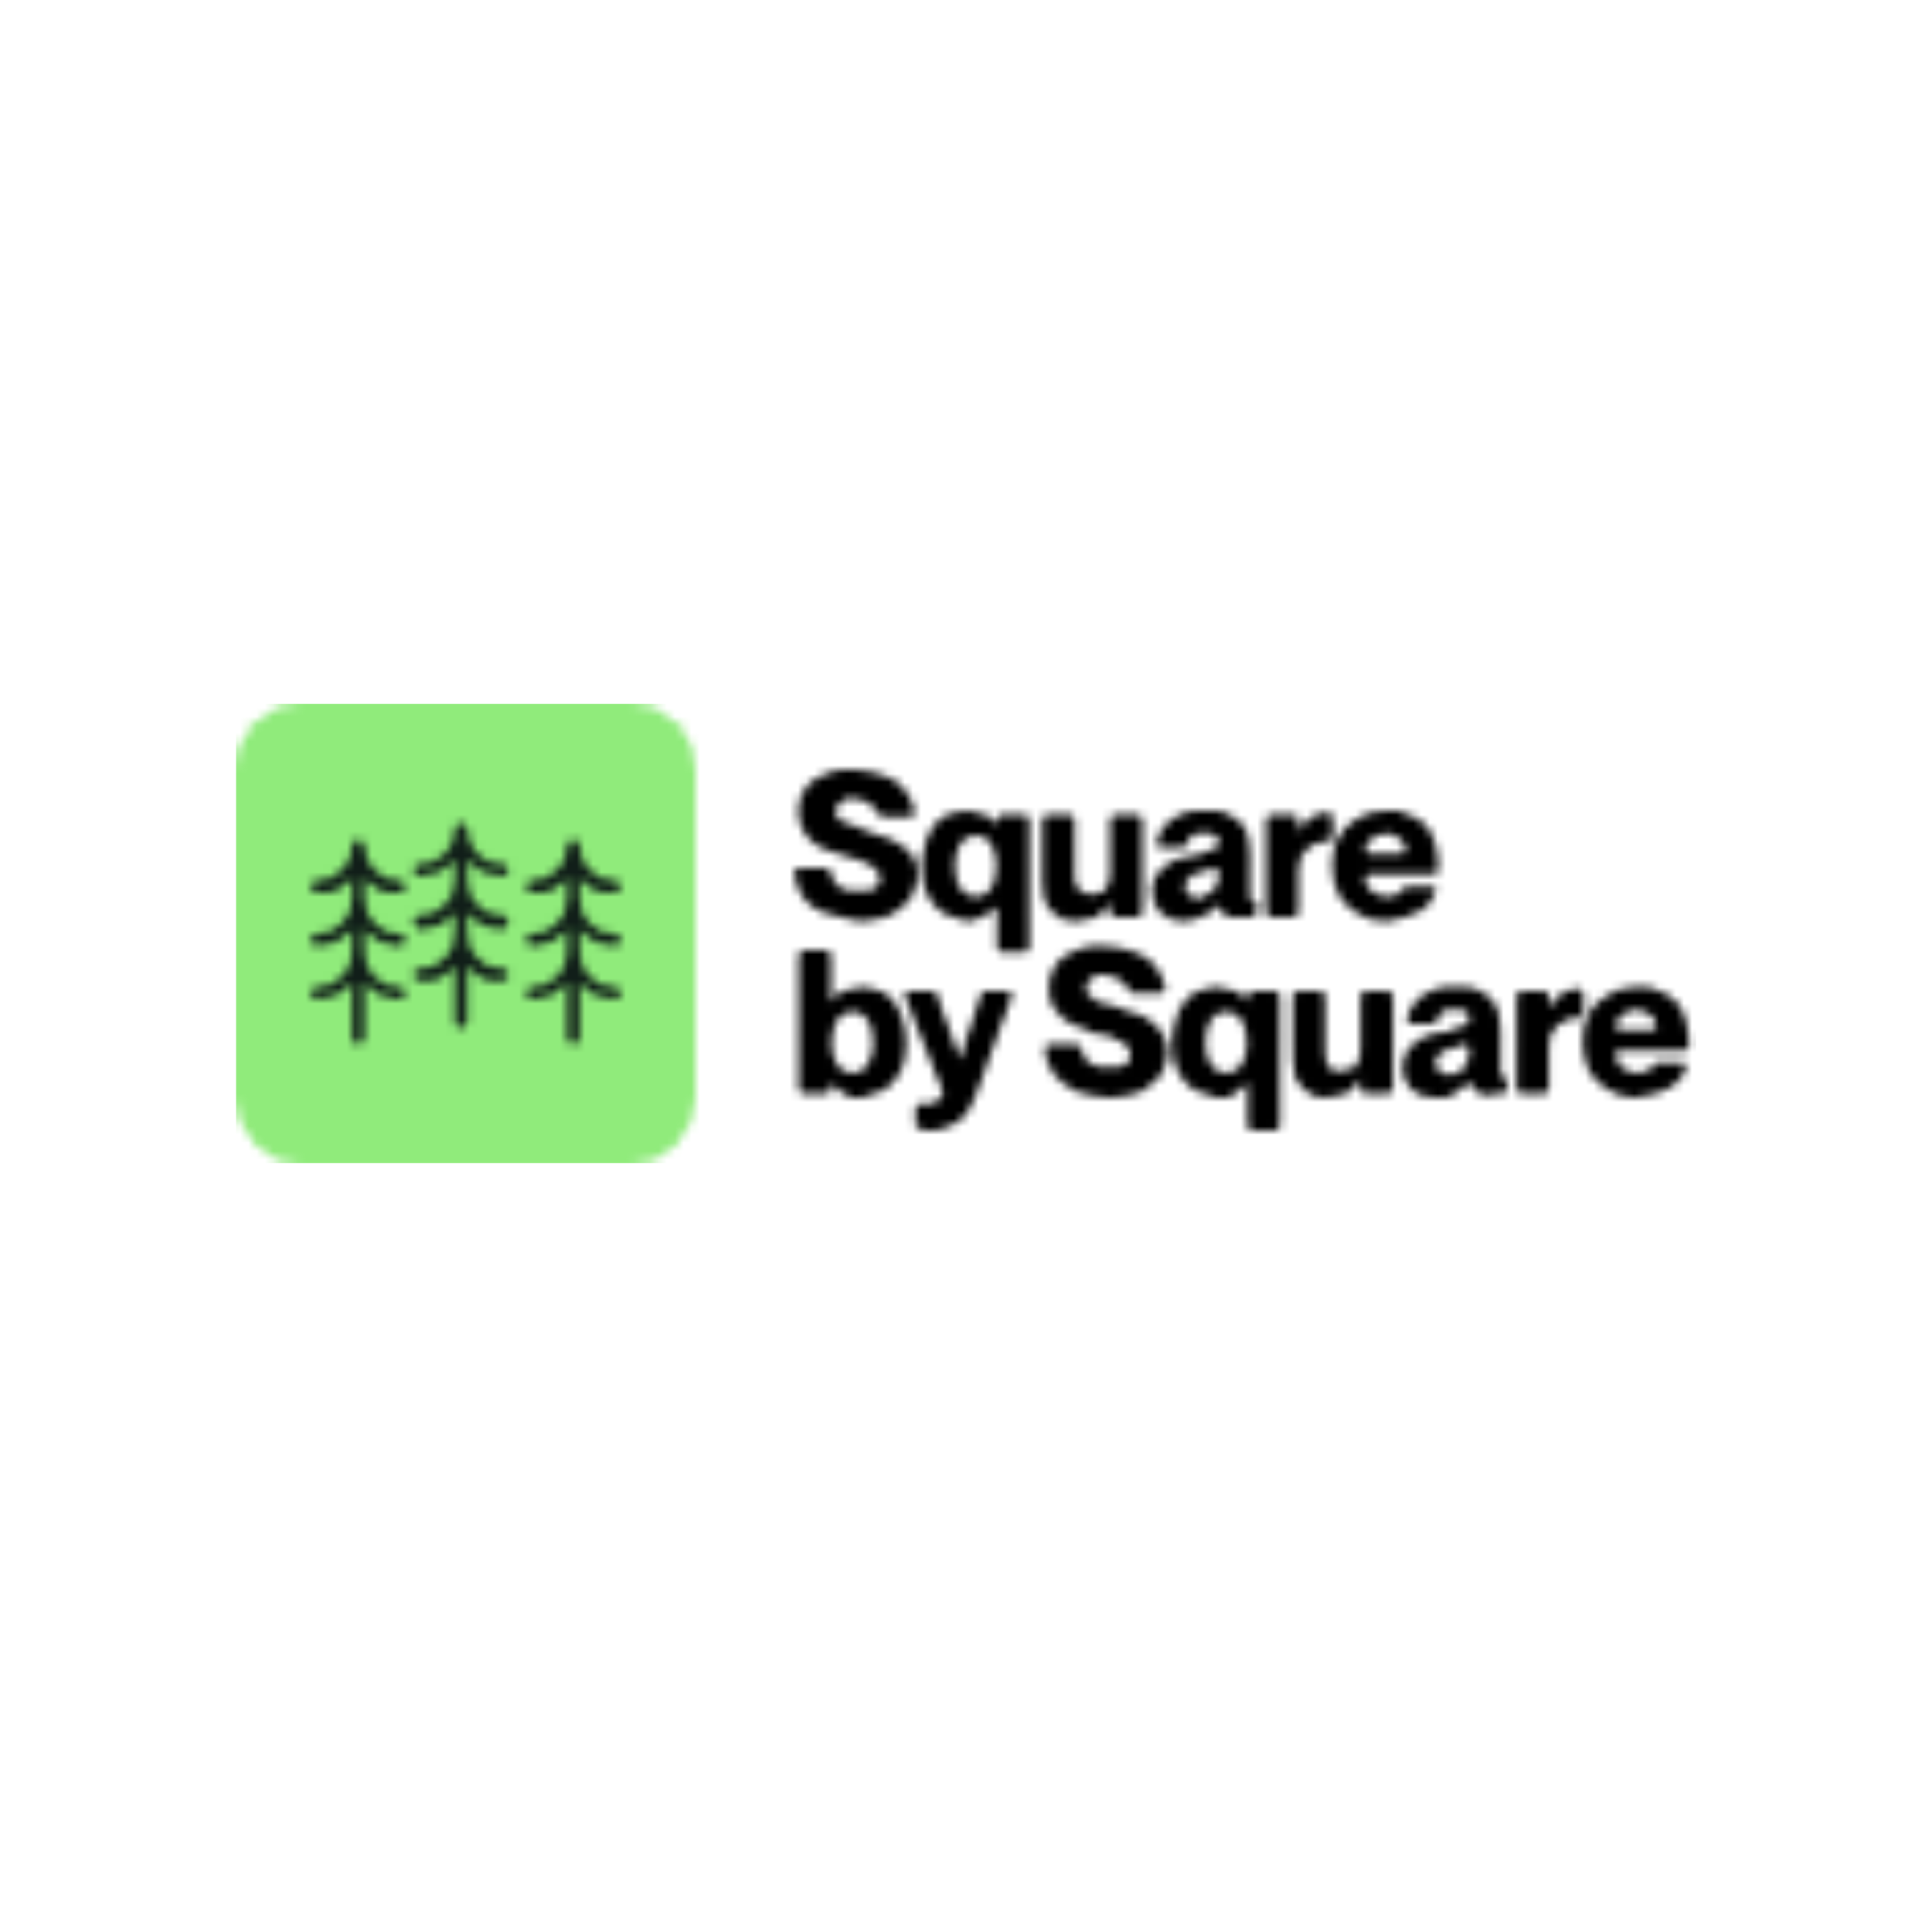 Square by Square Logo